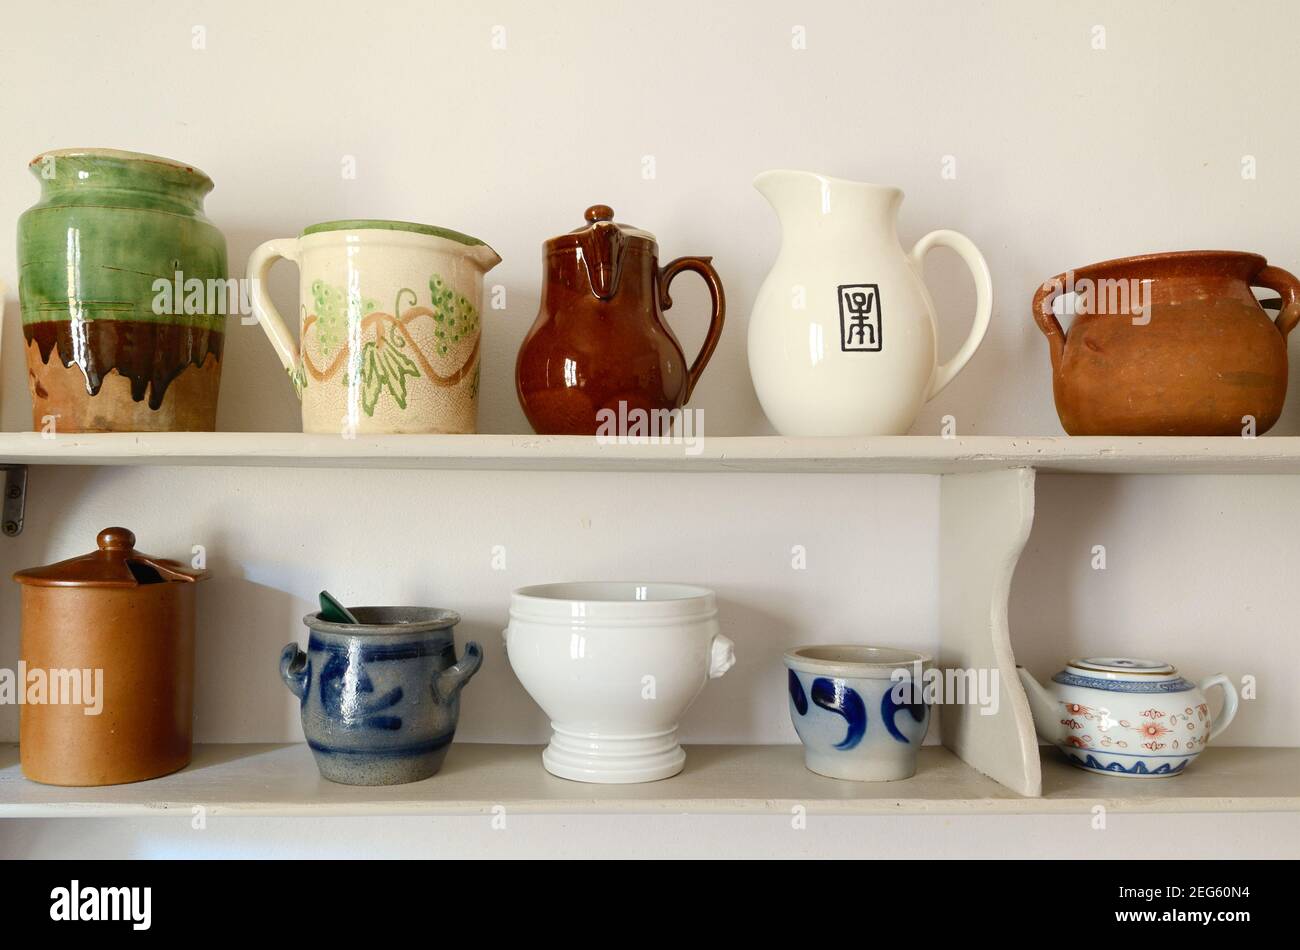 White Wooden Shelves with Display or Collection of Ceramic Pots, Pottery and Bowls Stock Photo